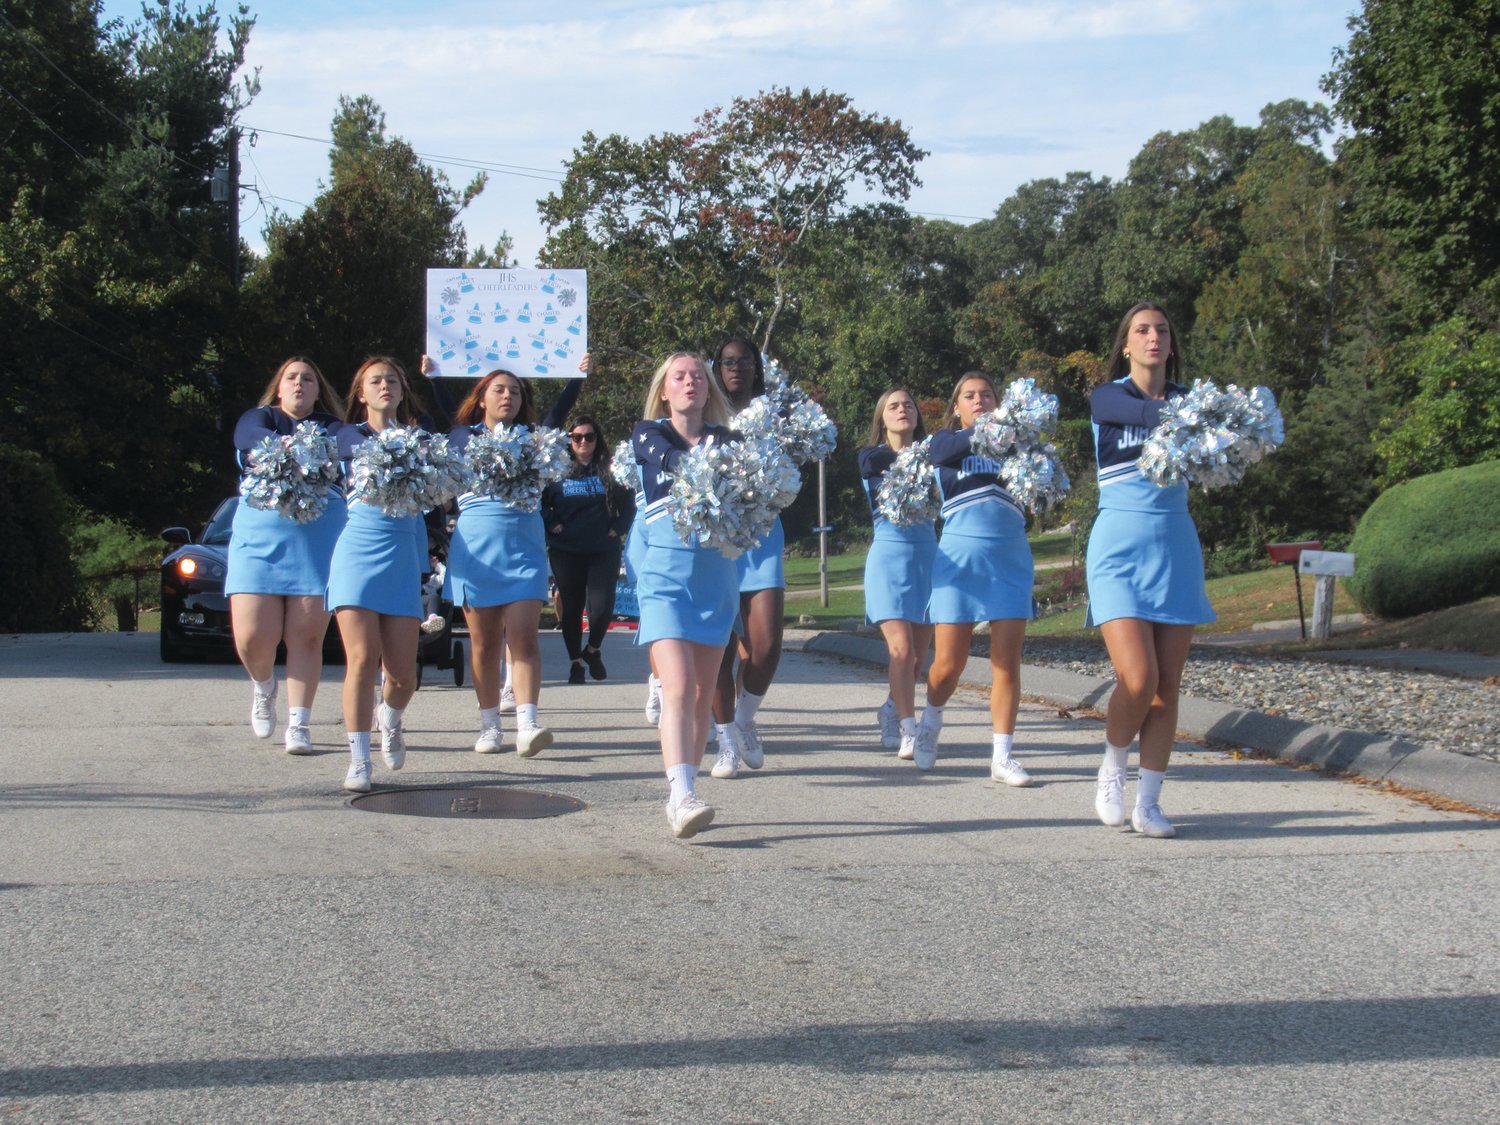 Johnston High School’s 2021 Homecoming will long be remembered as a super showcase of community spirit at an all-time high. The high school's cheerleading squad marched in the parade.